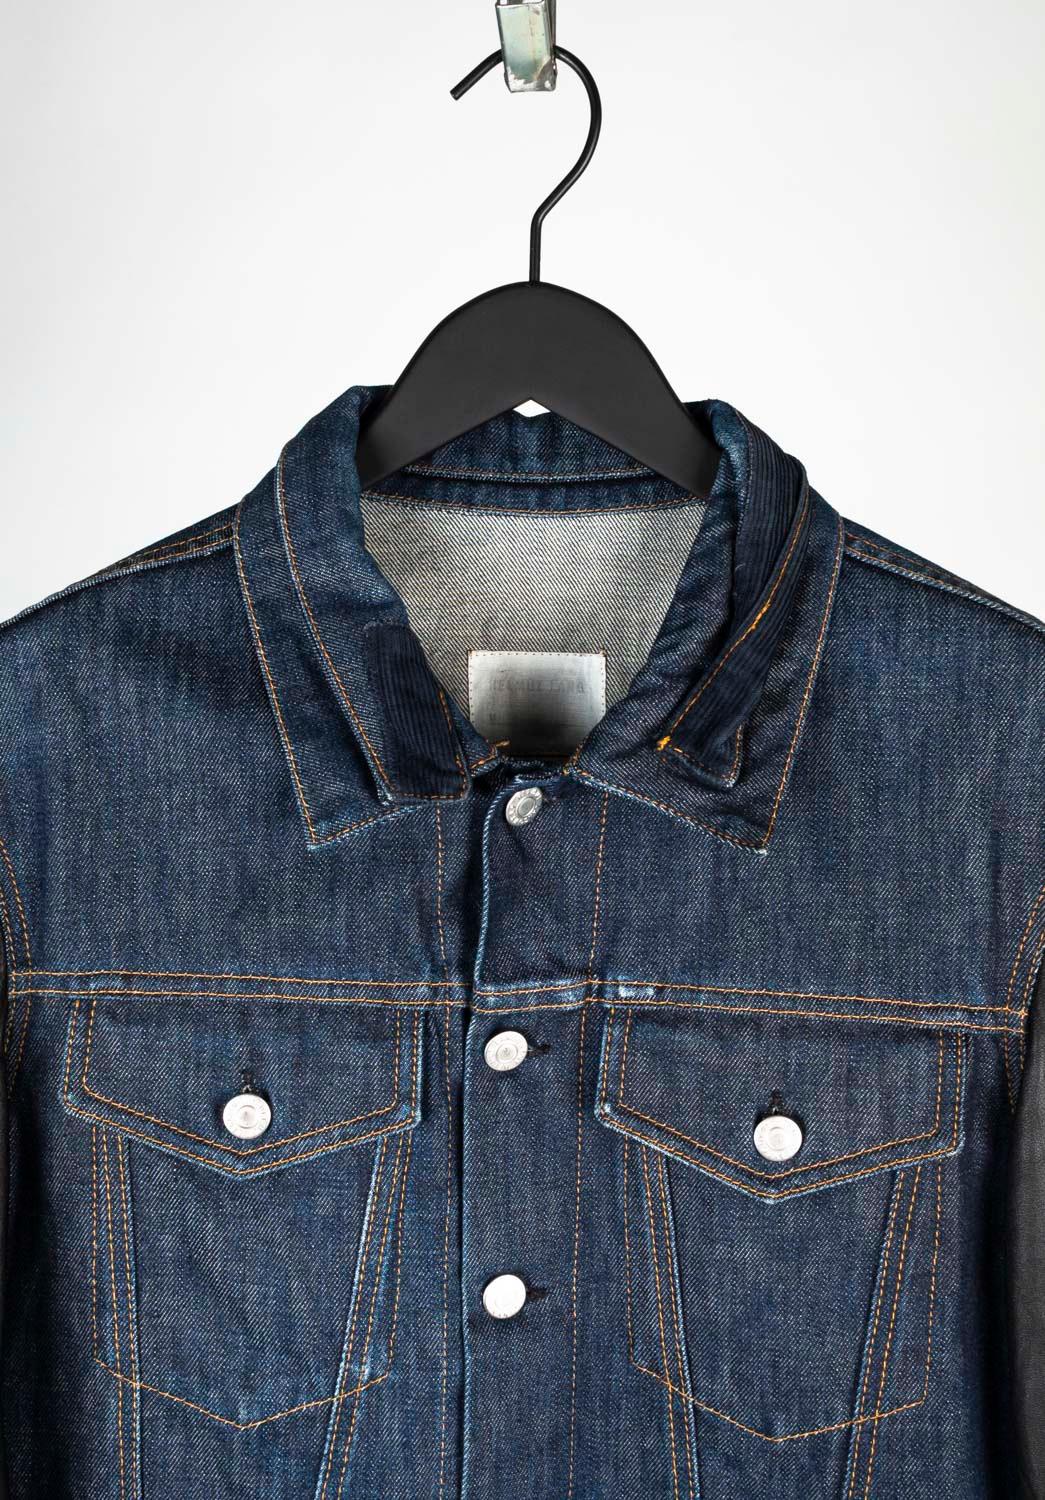 100% genuine Vintage Helmut Lang Denim Leather Sleeves Jacket 
Color: Blue/Black
(An actual color may a bit vary due to individual computer screen interpretation)
Material: 100% cotton/100% leather
Tag size: ITA52 (Large)
This jacket is great